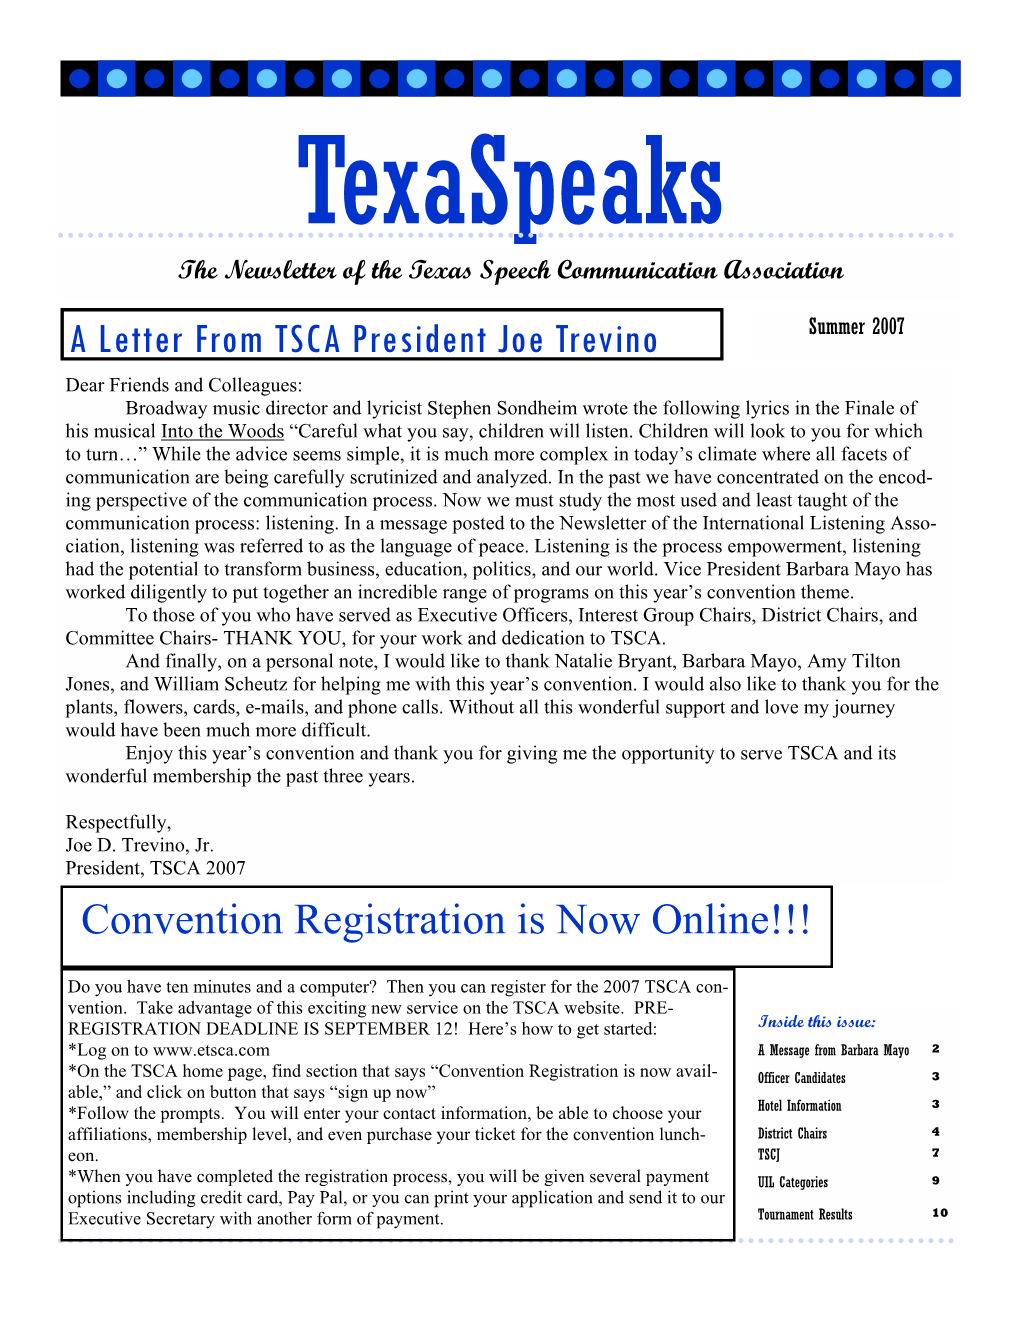 A Letter from TSCA President Joe Trevino Convention Registration Is